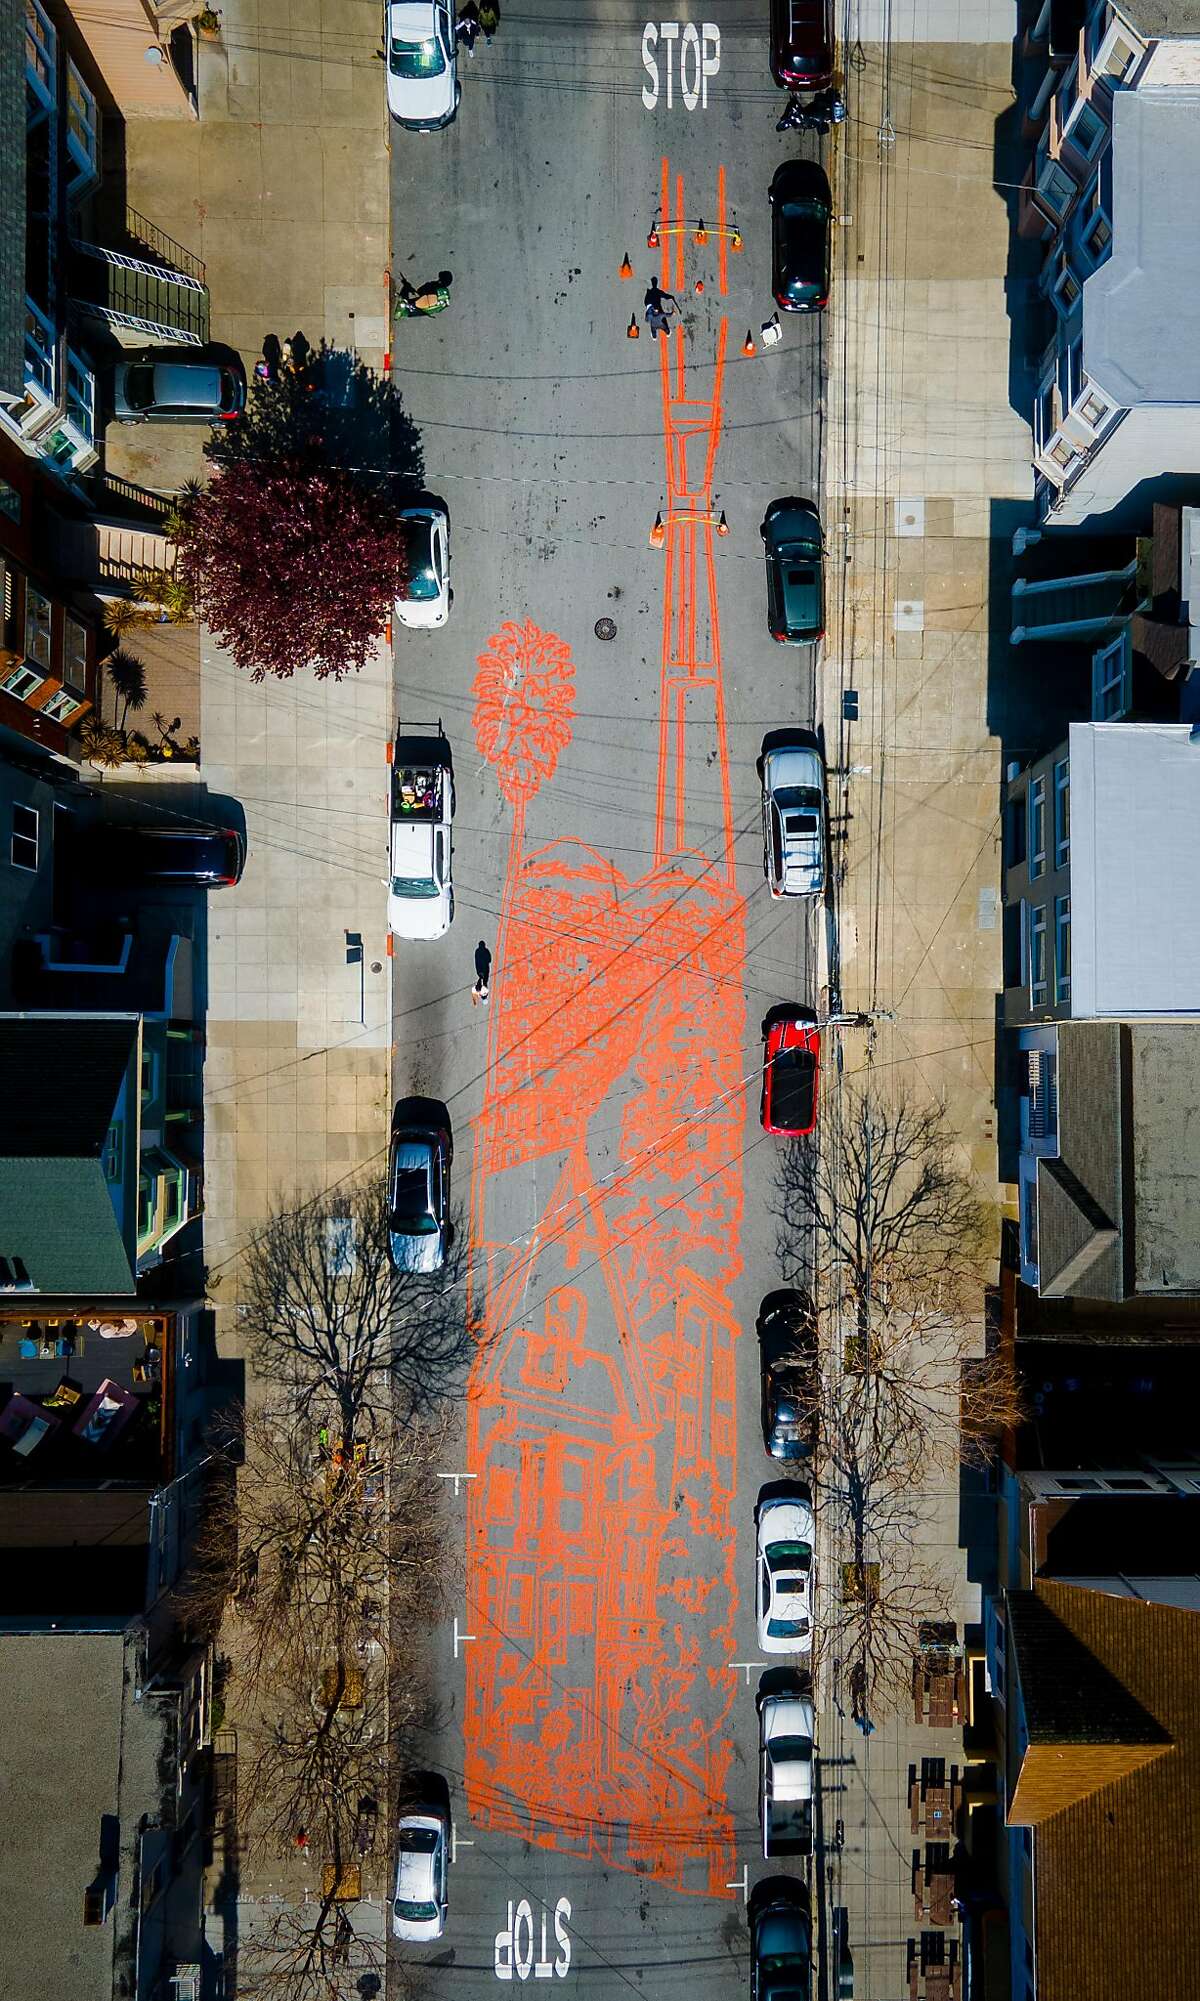 San Francisco Has A New Slow Street Mural Watch It Come To Life In